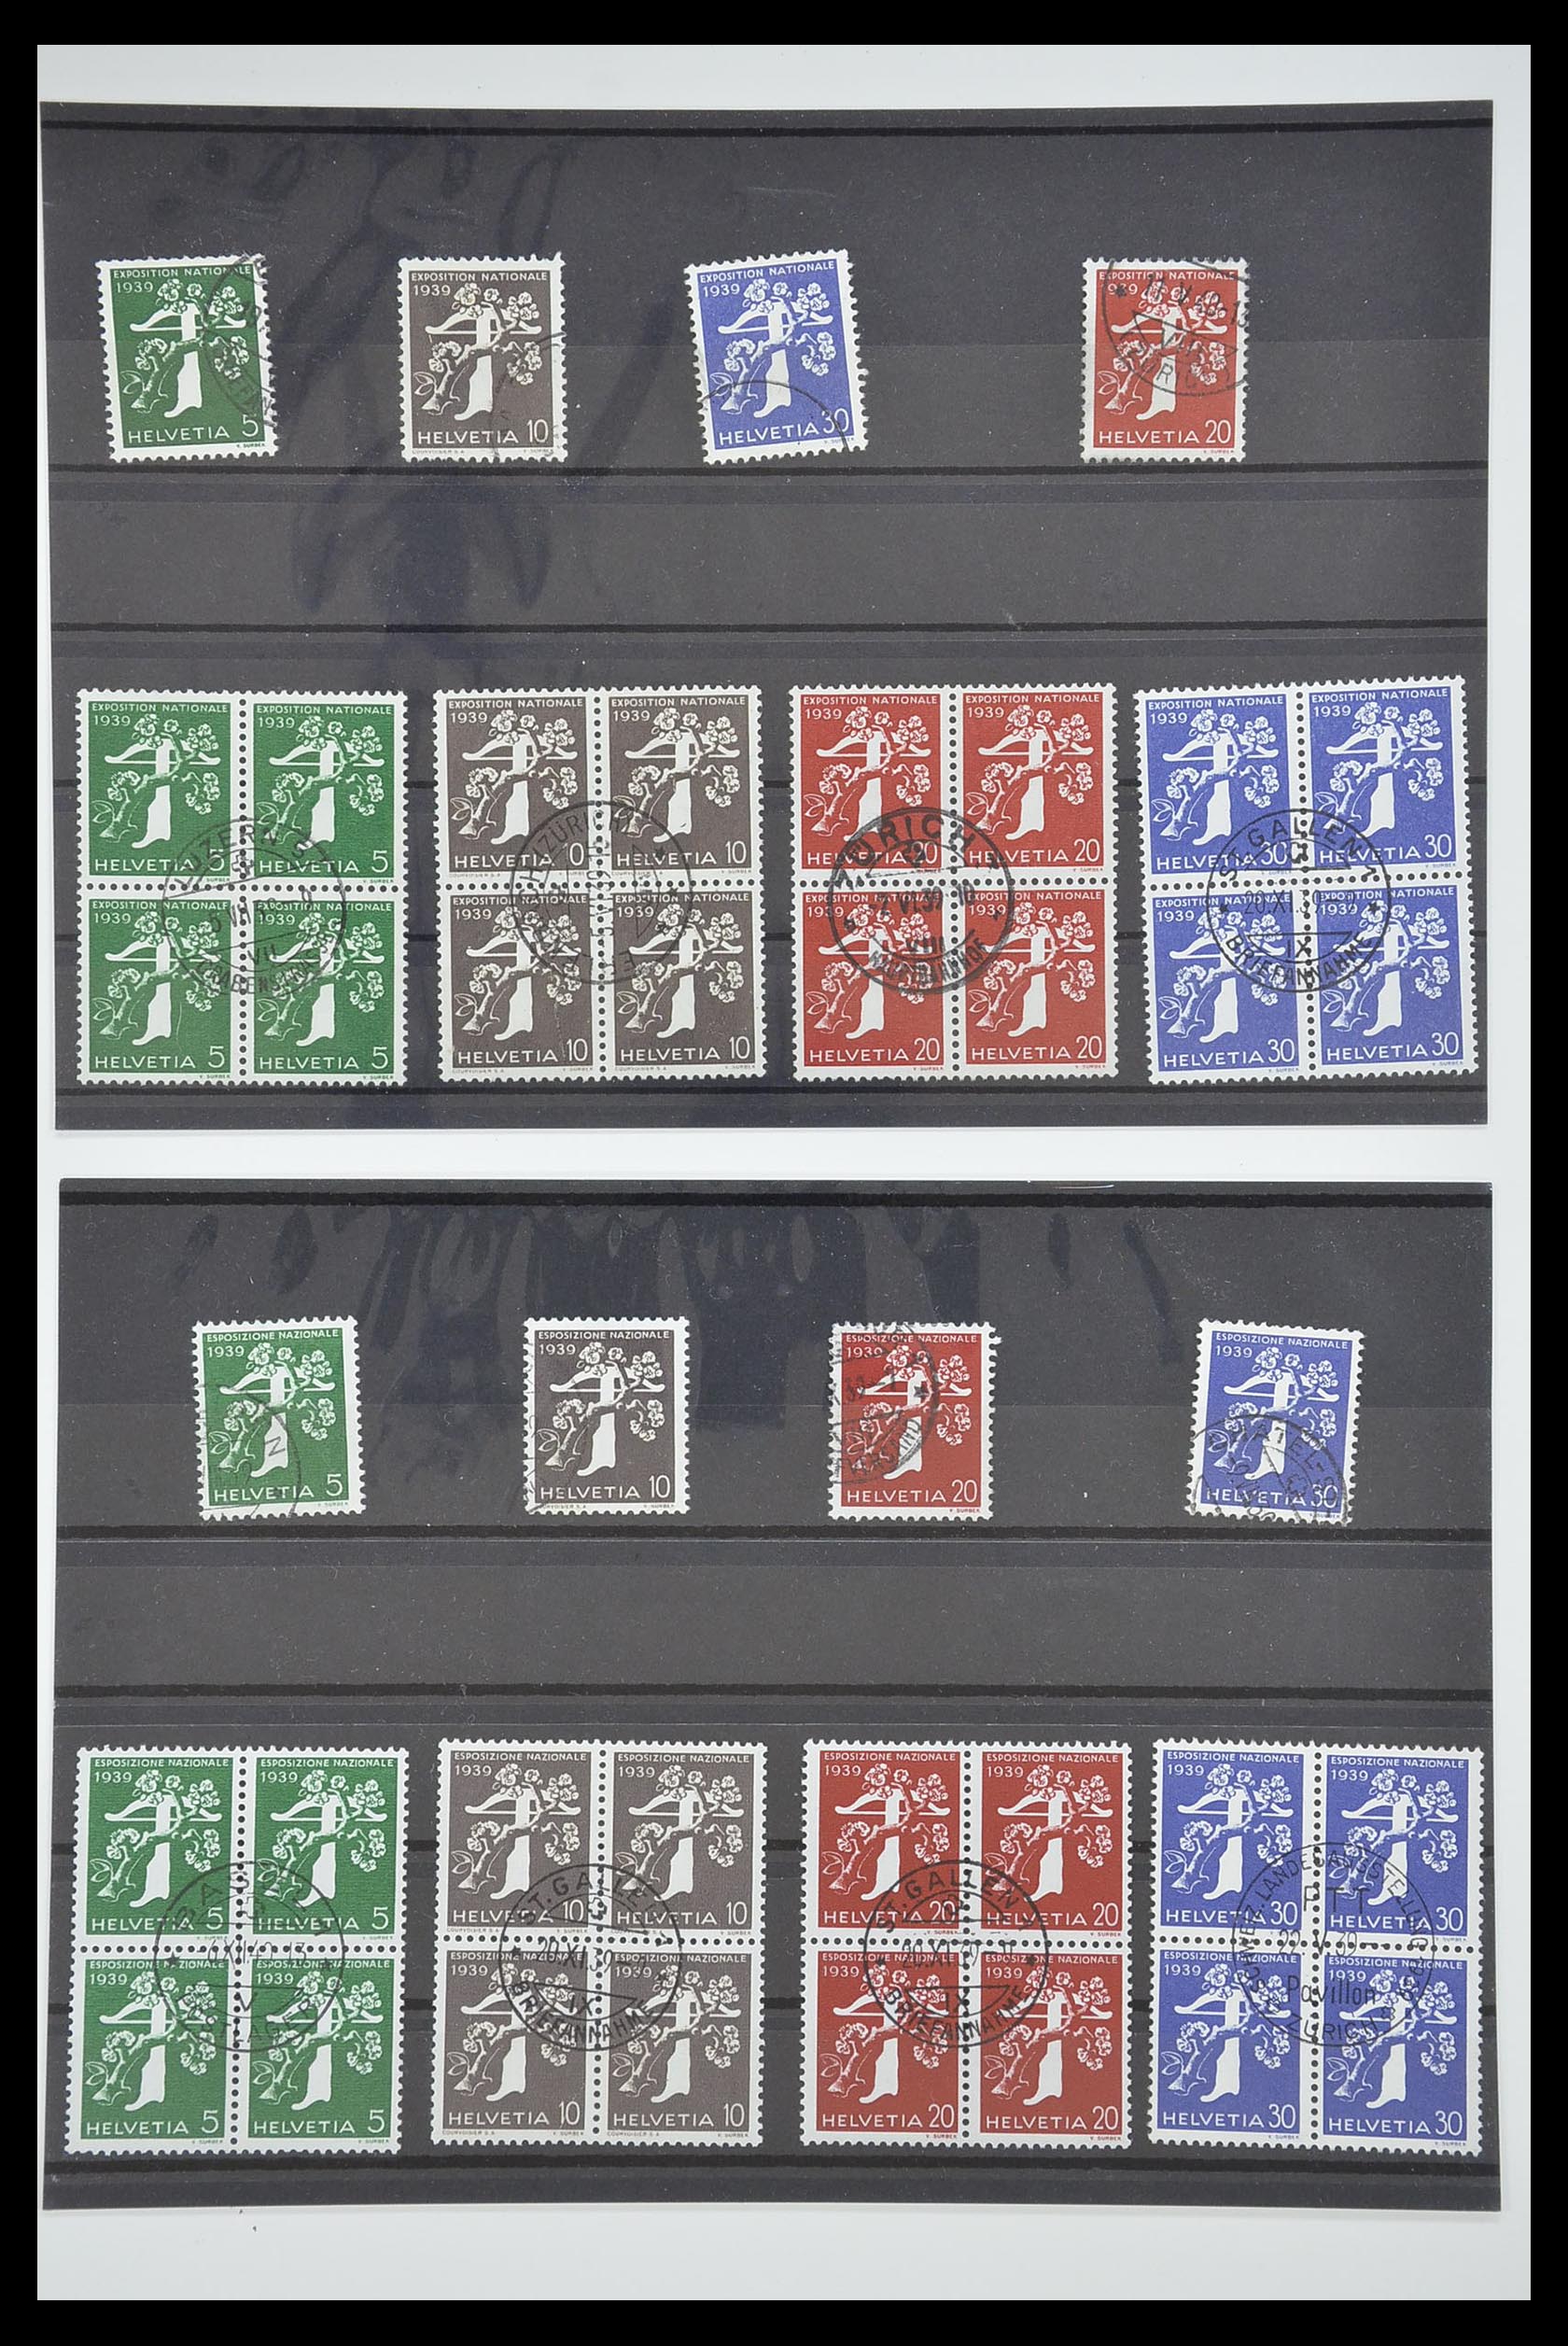 33284 031 - Stamp collection 33284 Switzerland better issues 1900-1995.